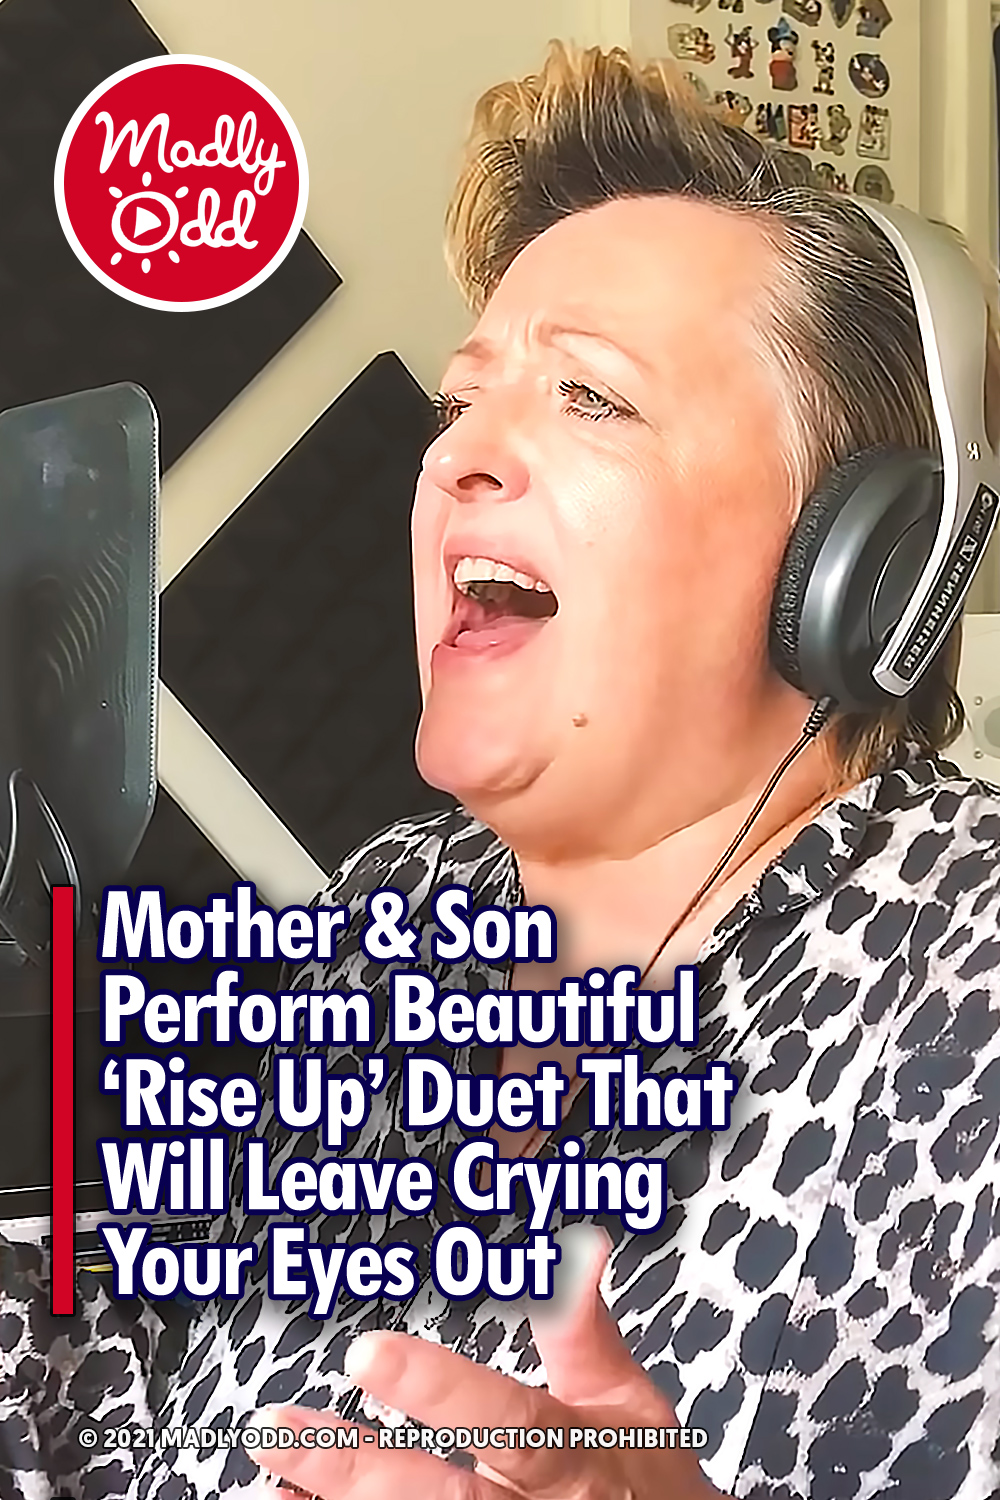 Mother & Son Perform Beautiful ‘Rise Up’ Duet That Will Leave Crying Your Eyes Out